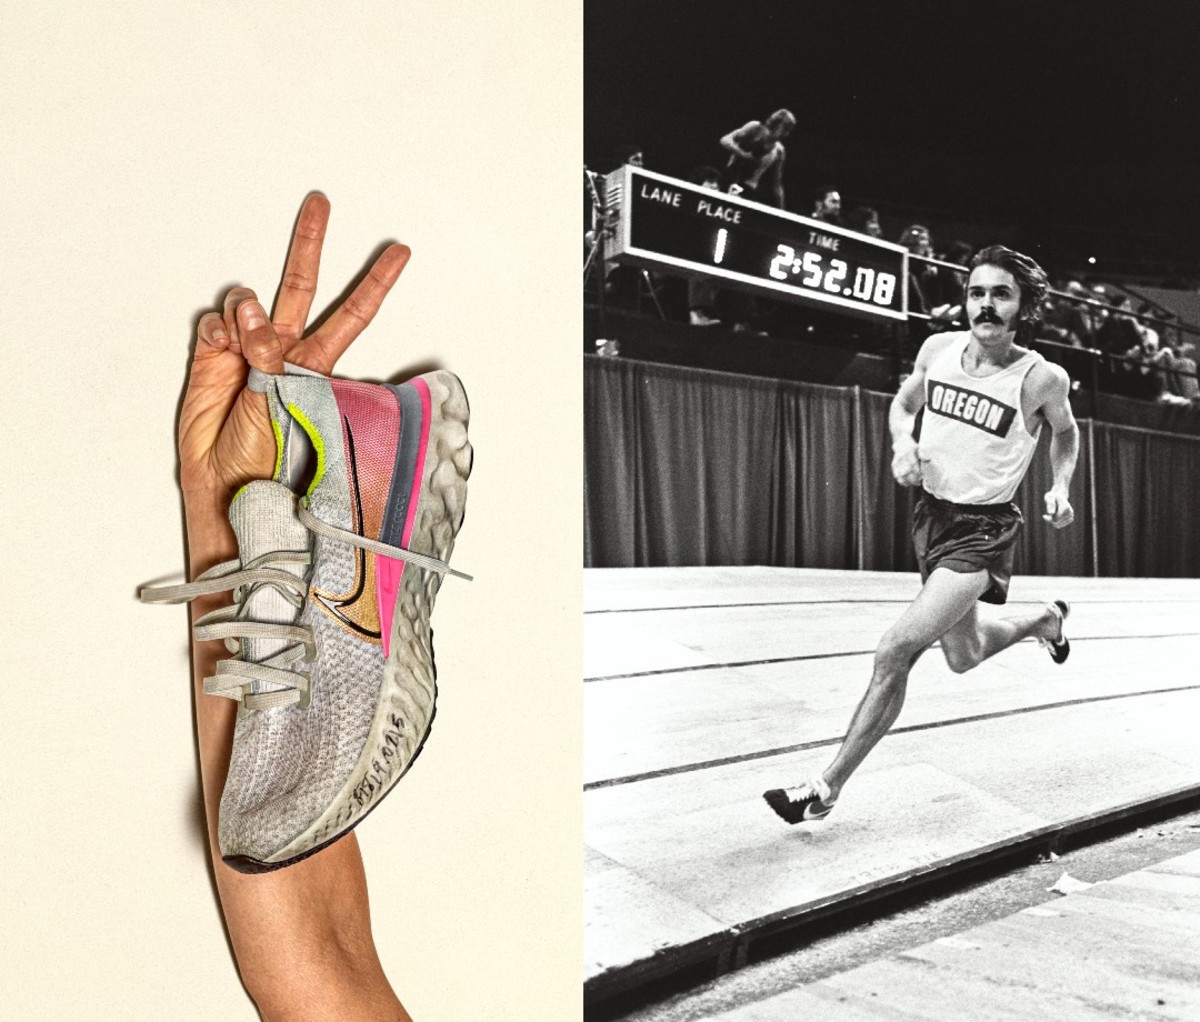 The picture on the left shows frequently worn running sneakers in a person's hands; right shows runners sprinting on the track